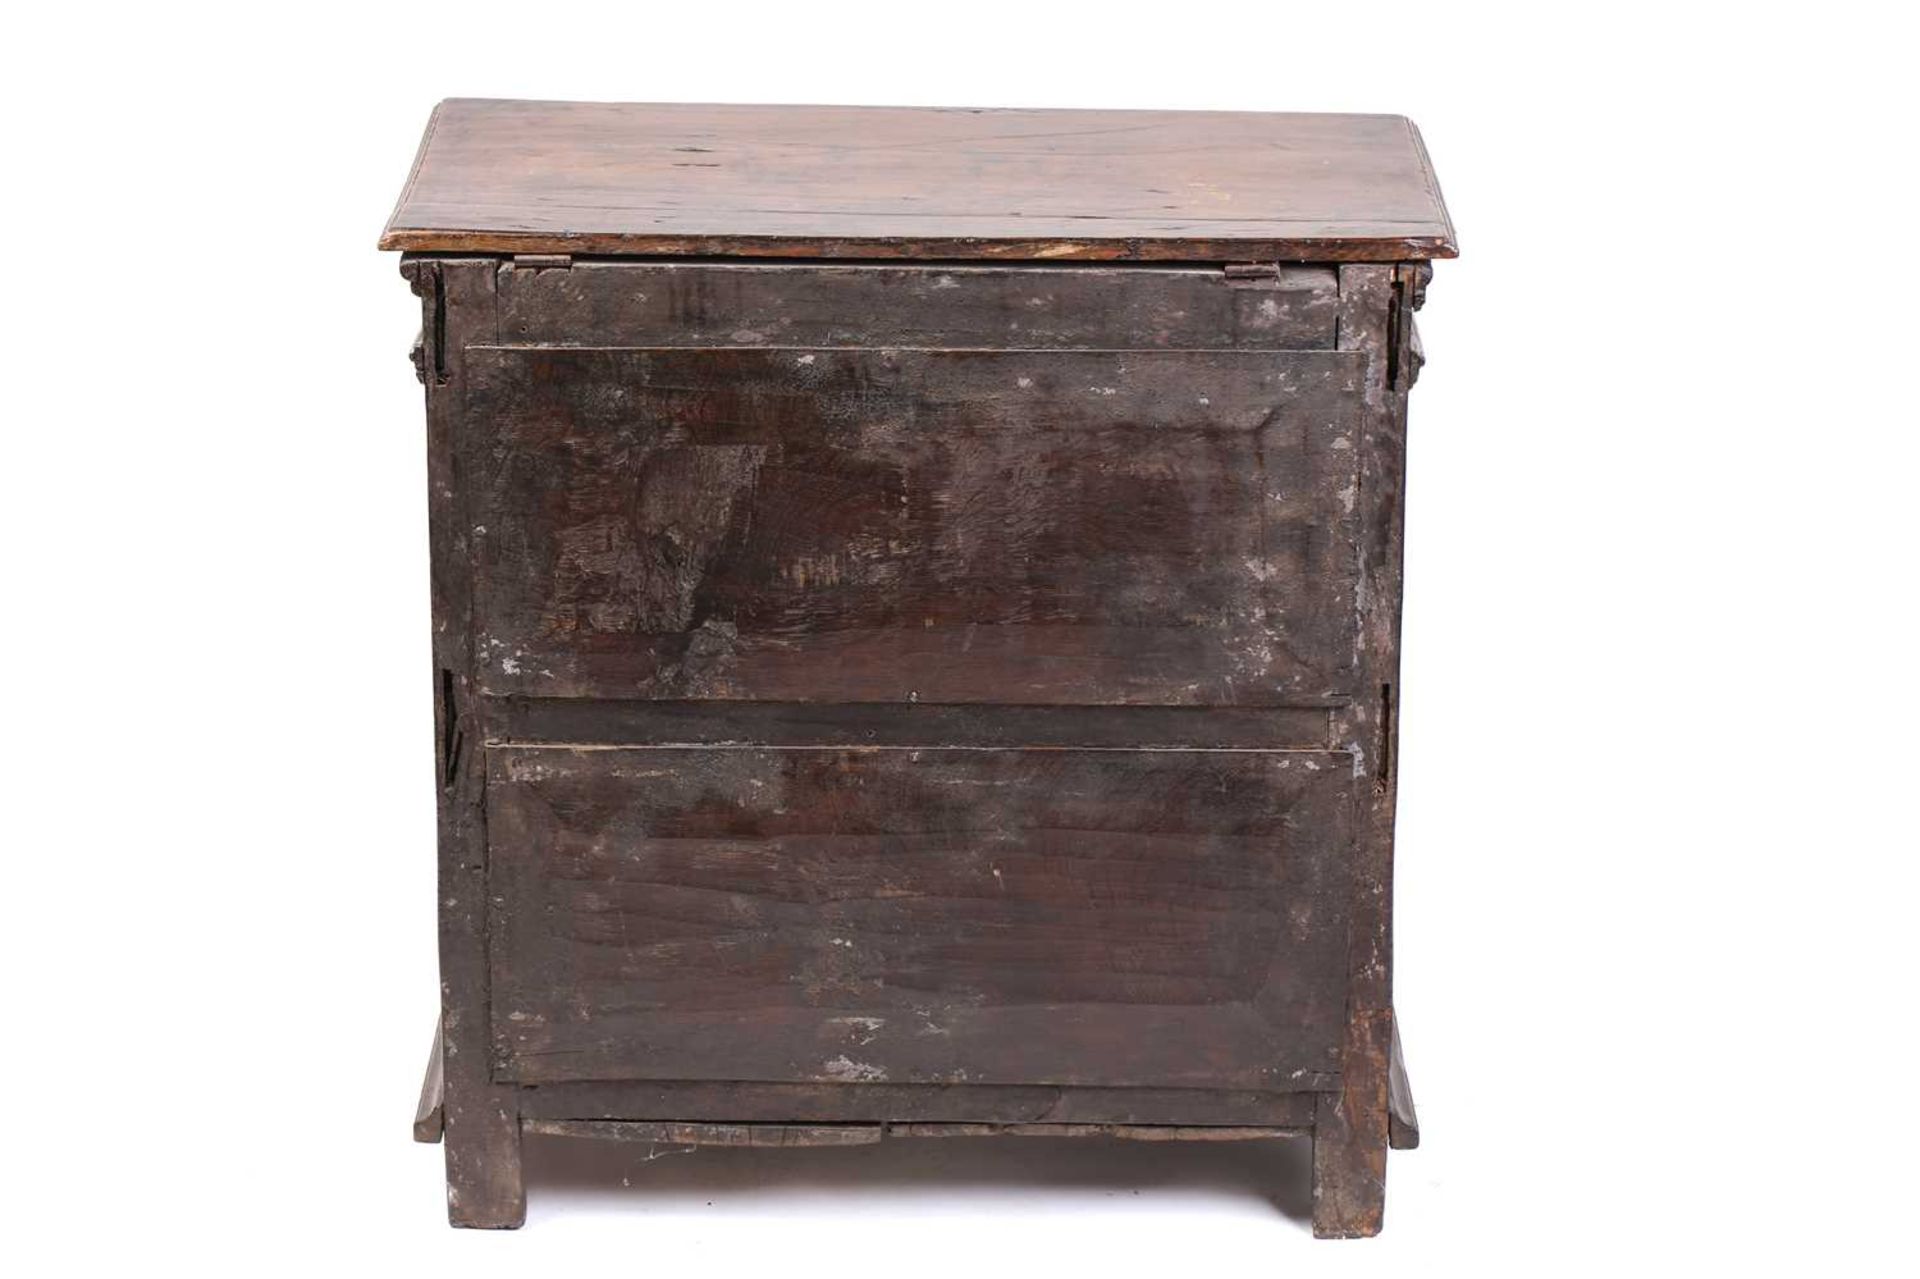 A carved oak 17th-century style three-drawer chest (17th century period timber and later, re- - Image 5 of 9